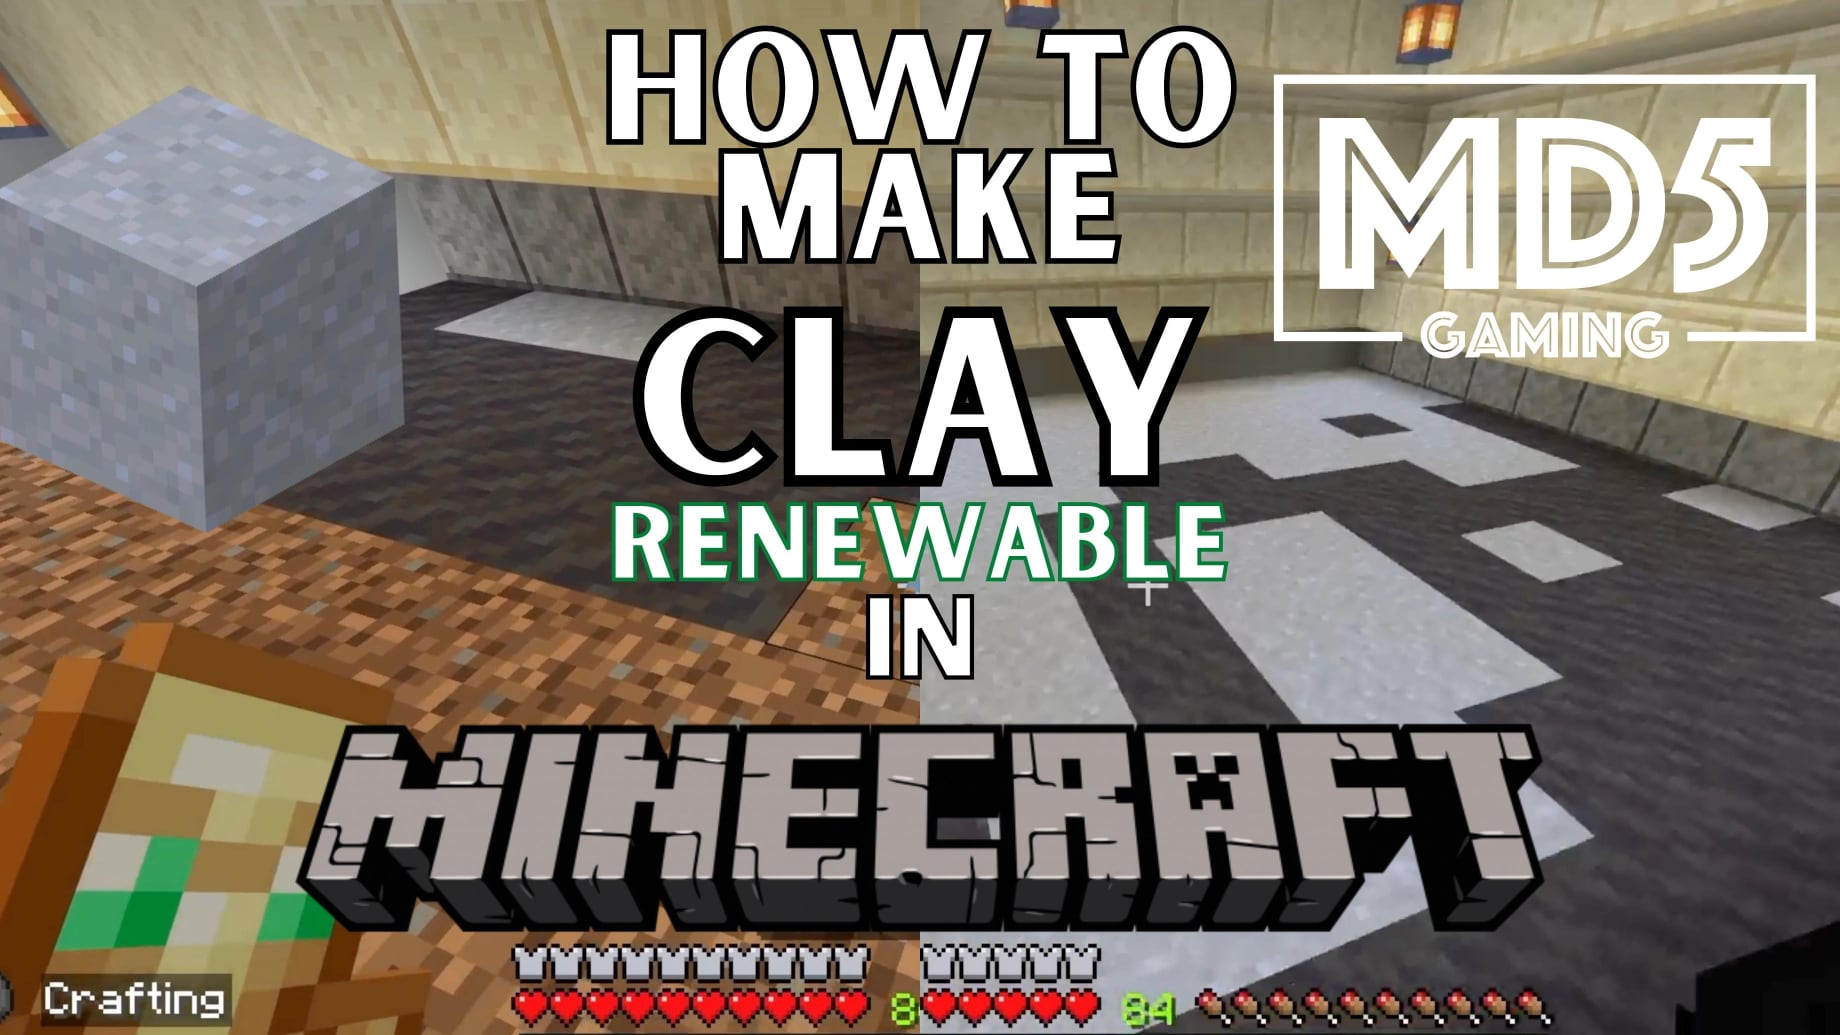 How To Make Clay Renewable In Minecraft